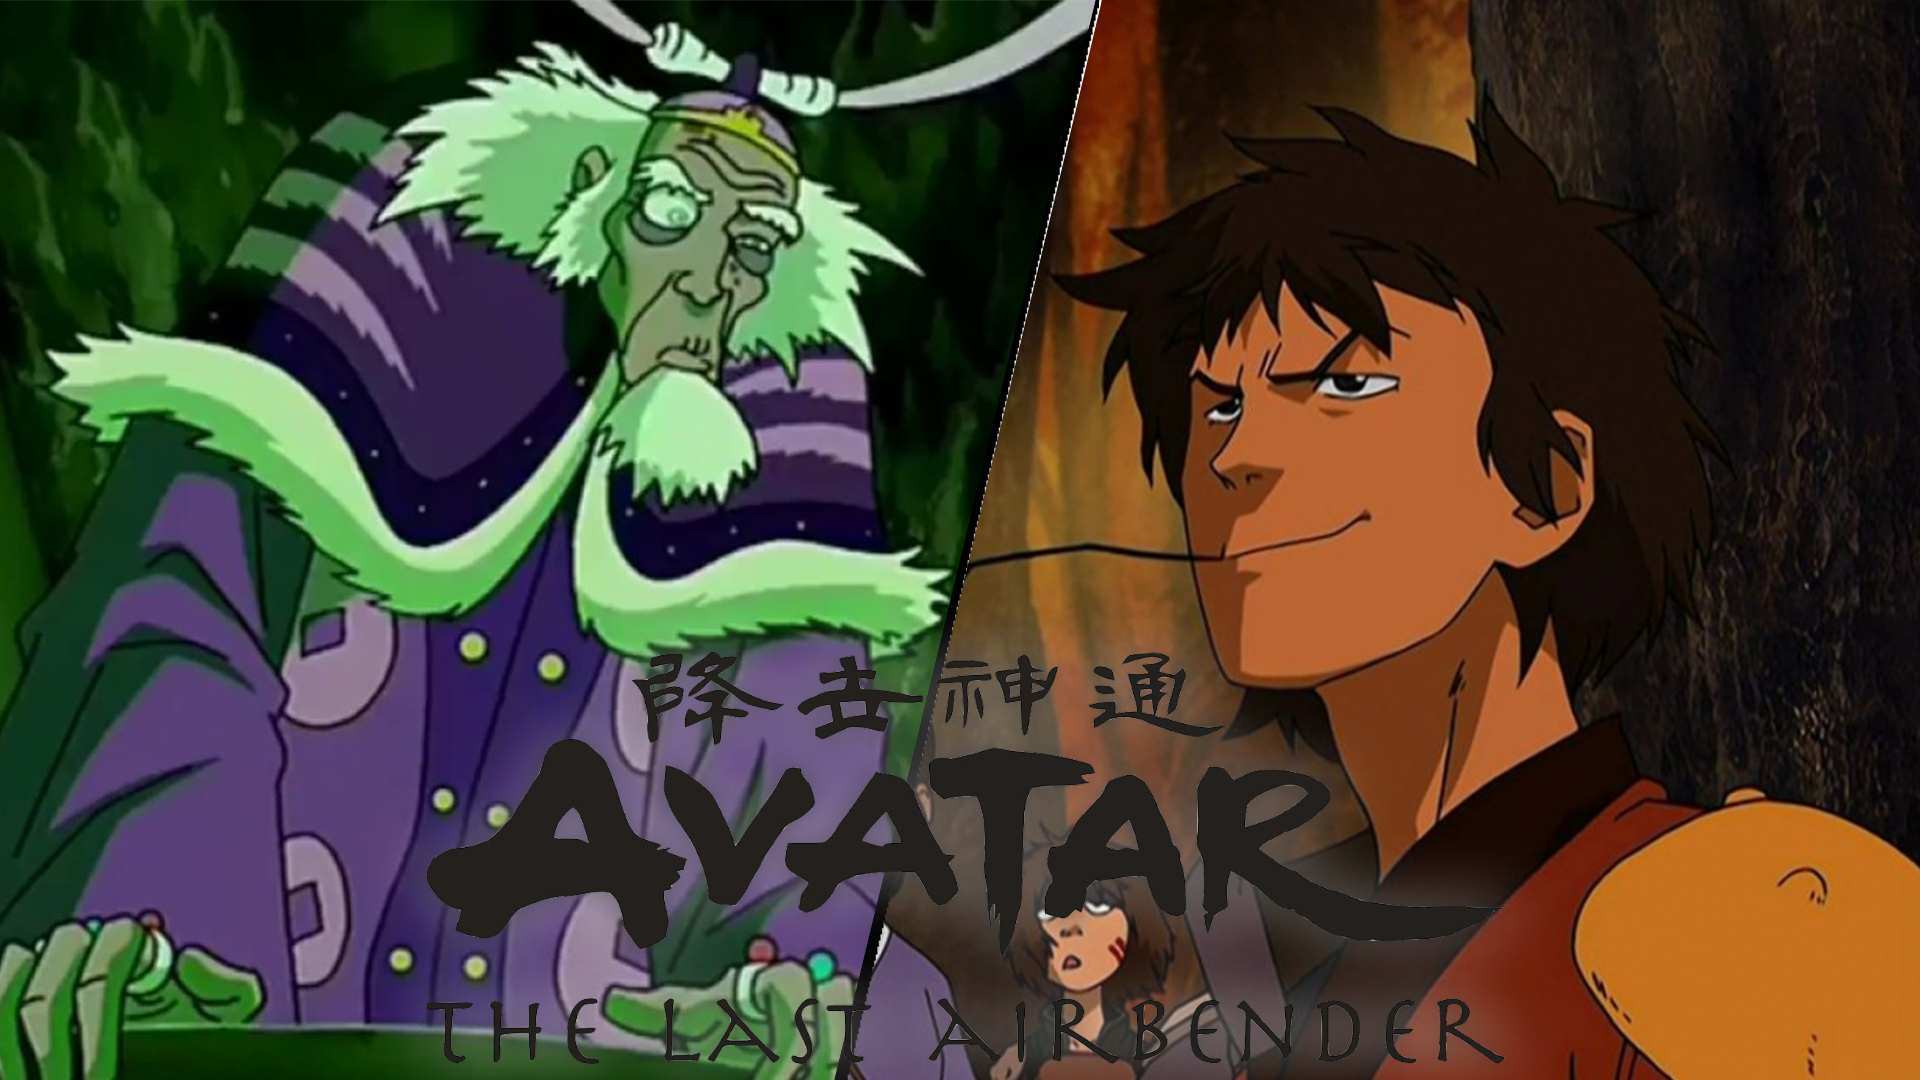 Character Breakdowns Confirm King Bumi  Jet For Netflixs Avatar The  Last Airbender TV Series EXCLUSIVE  Knight Edge Media